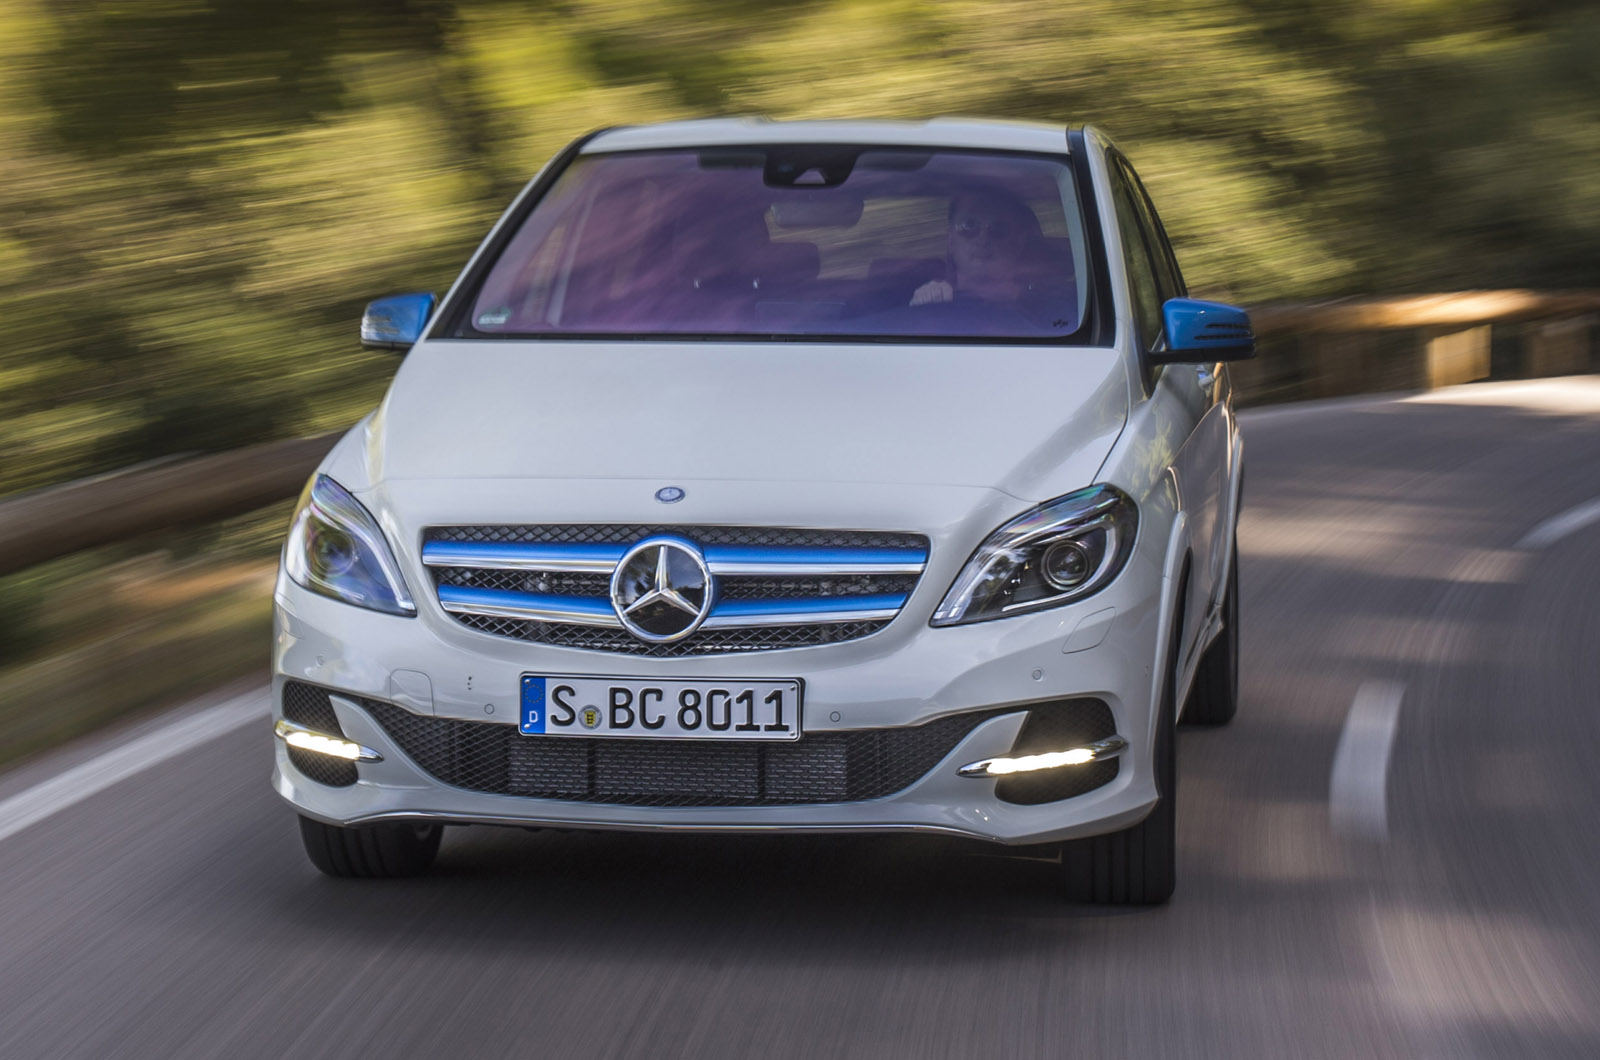 Used Mercedes-Benz B-Class Electric Drive 2015-2017 review